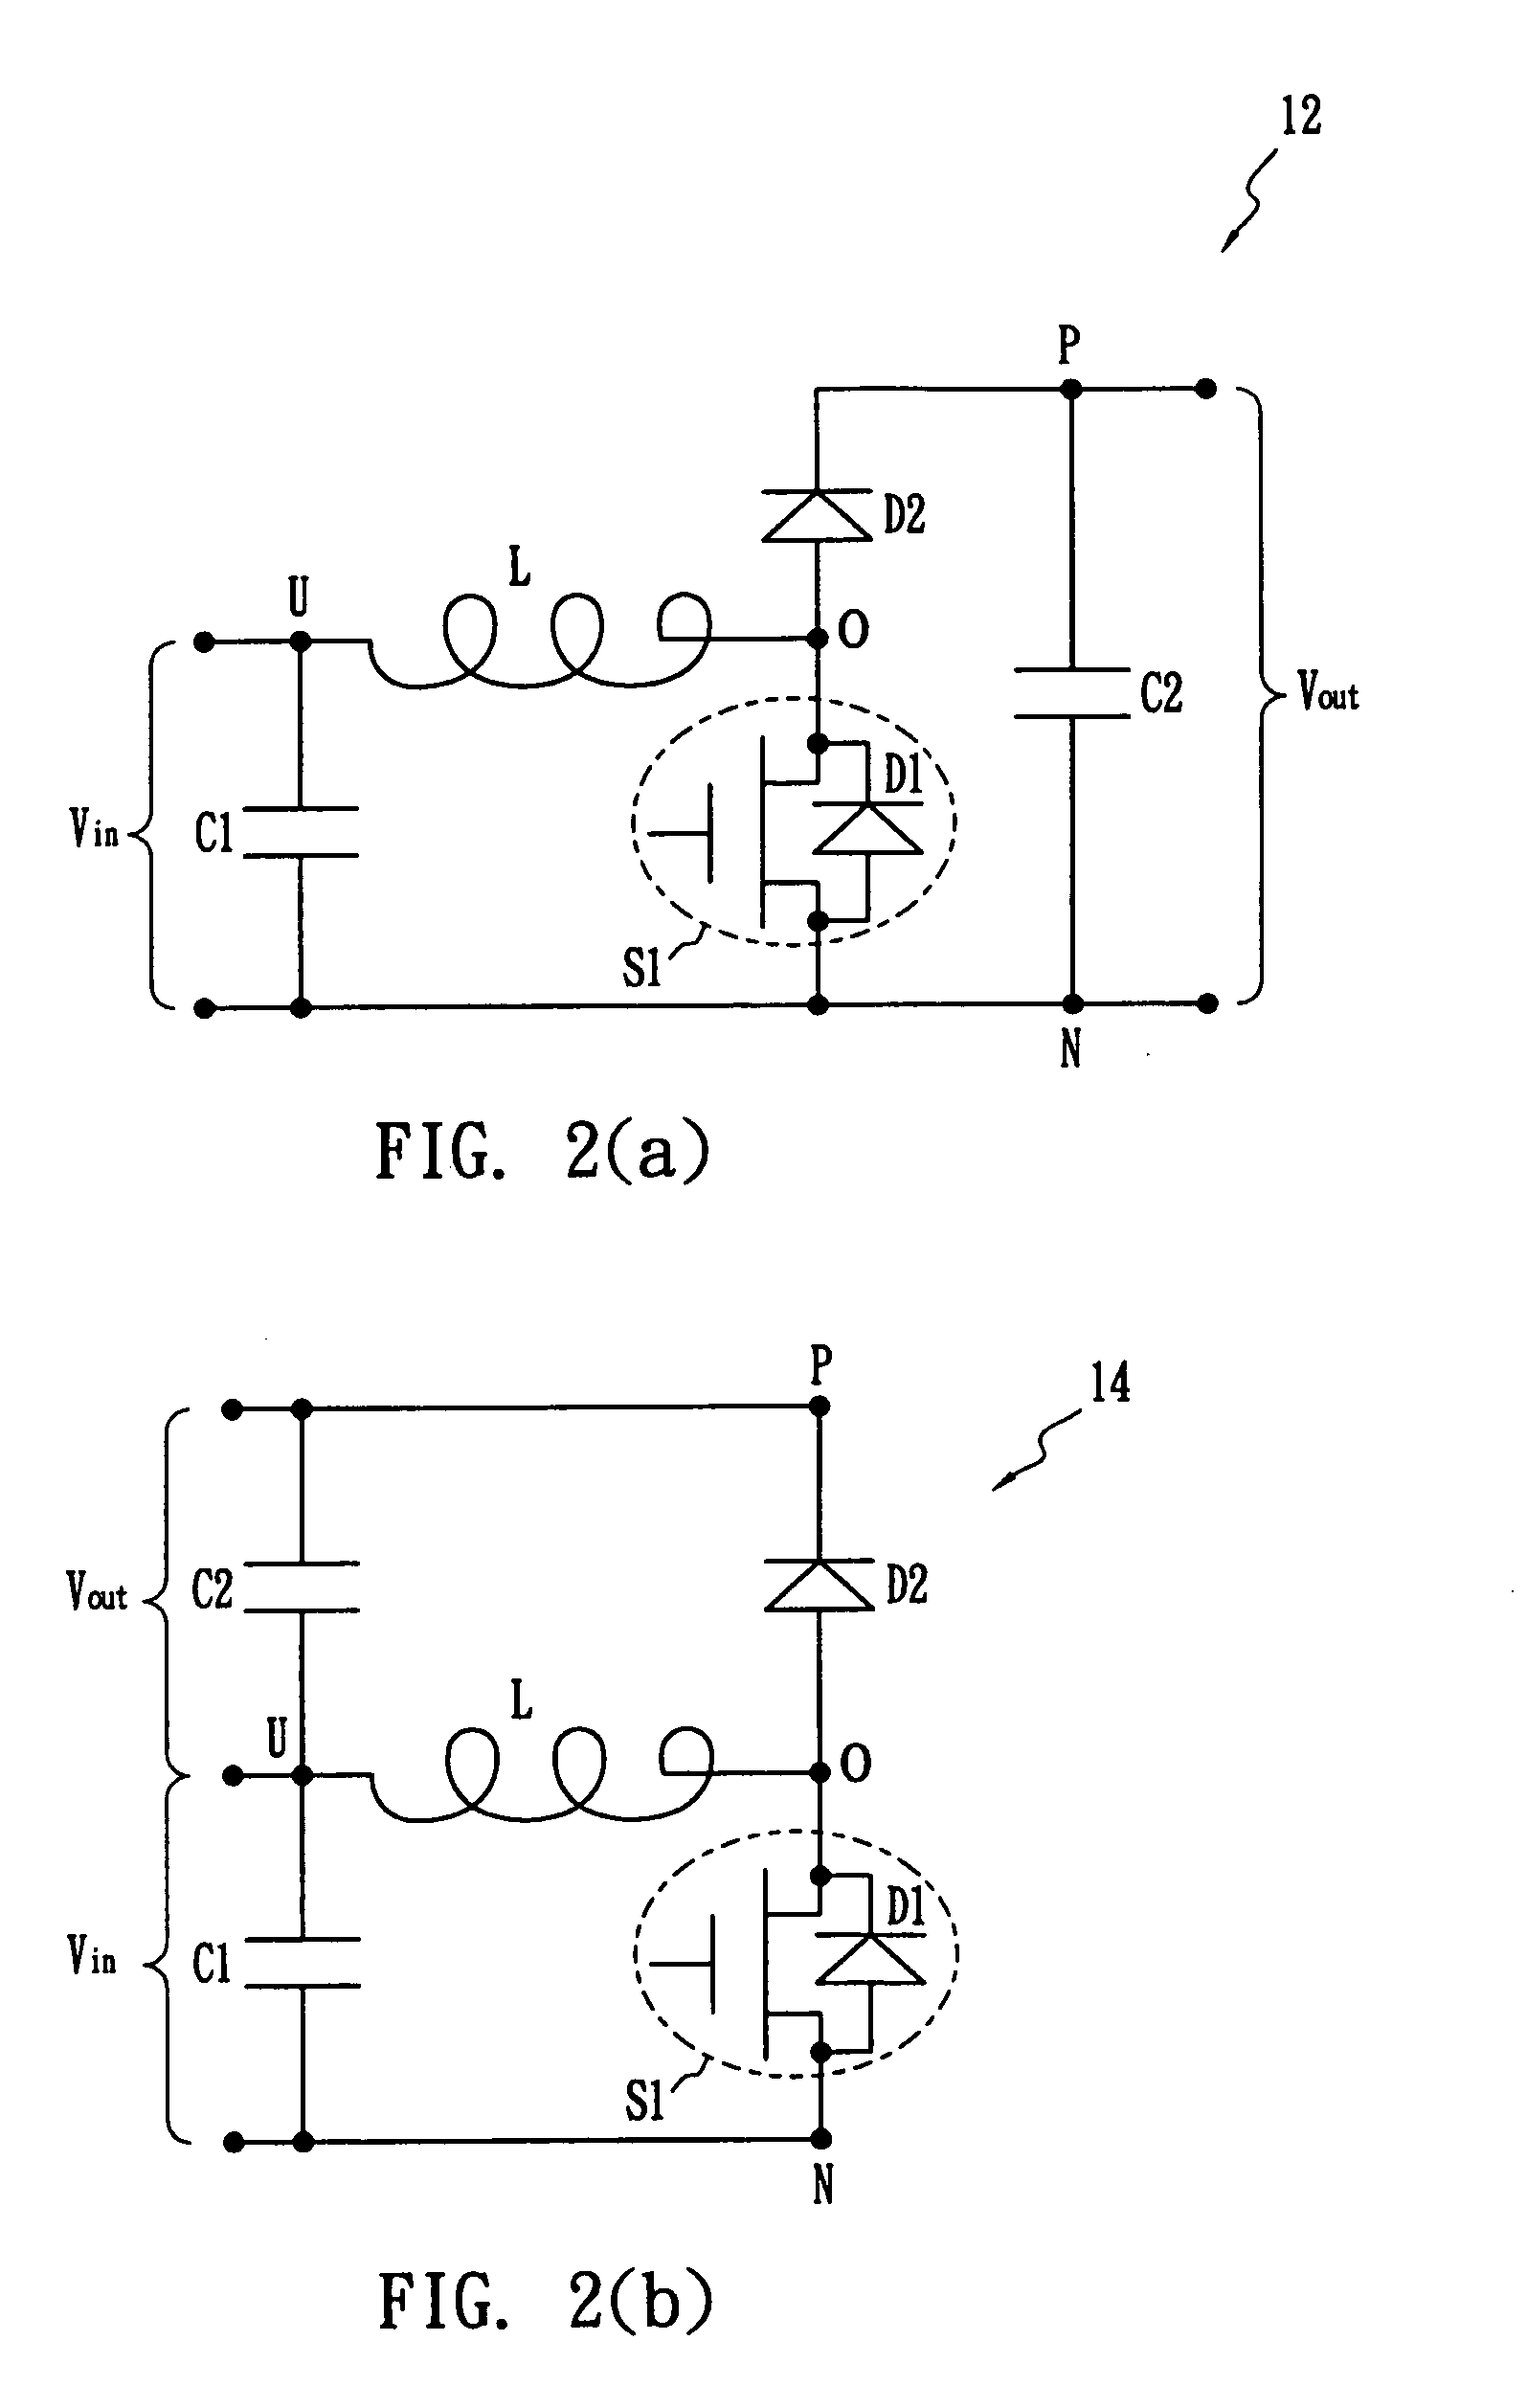 Zero voltage switch method for synchronous rectifier and inverter